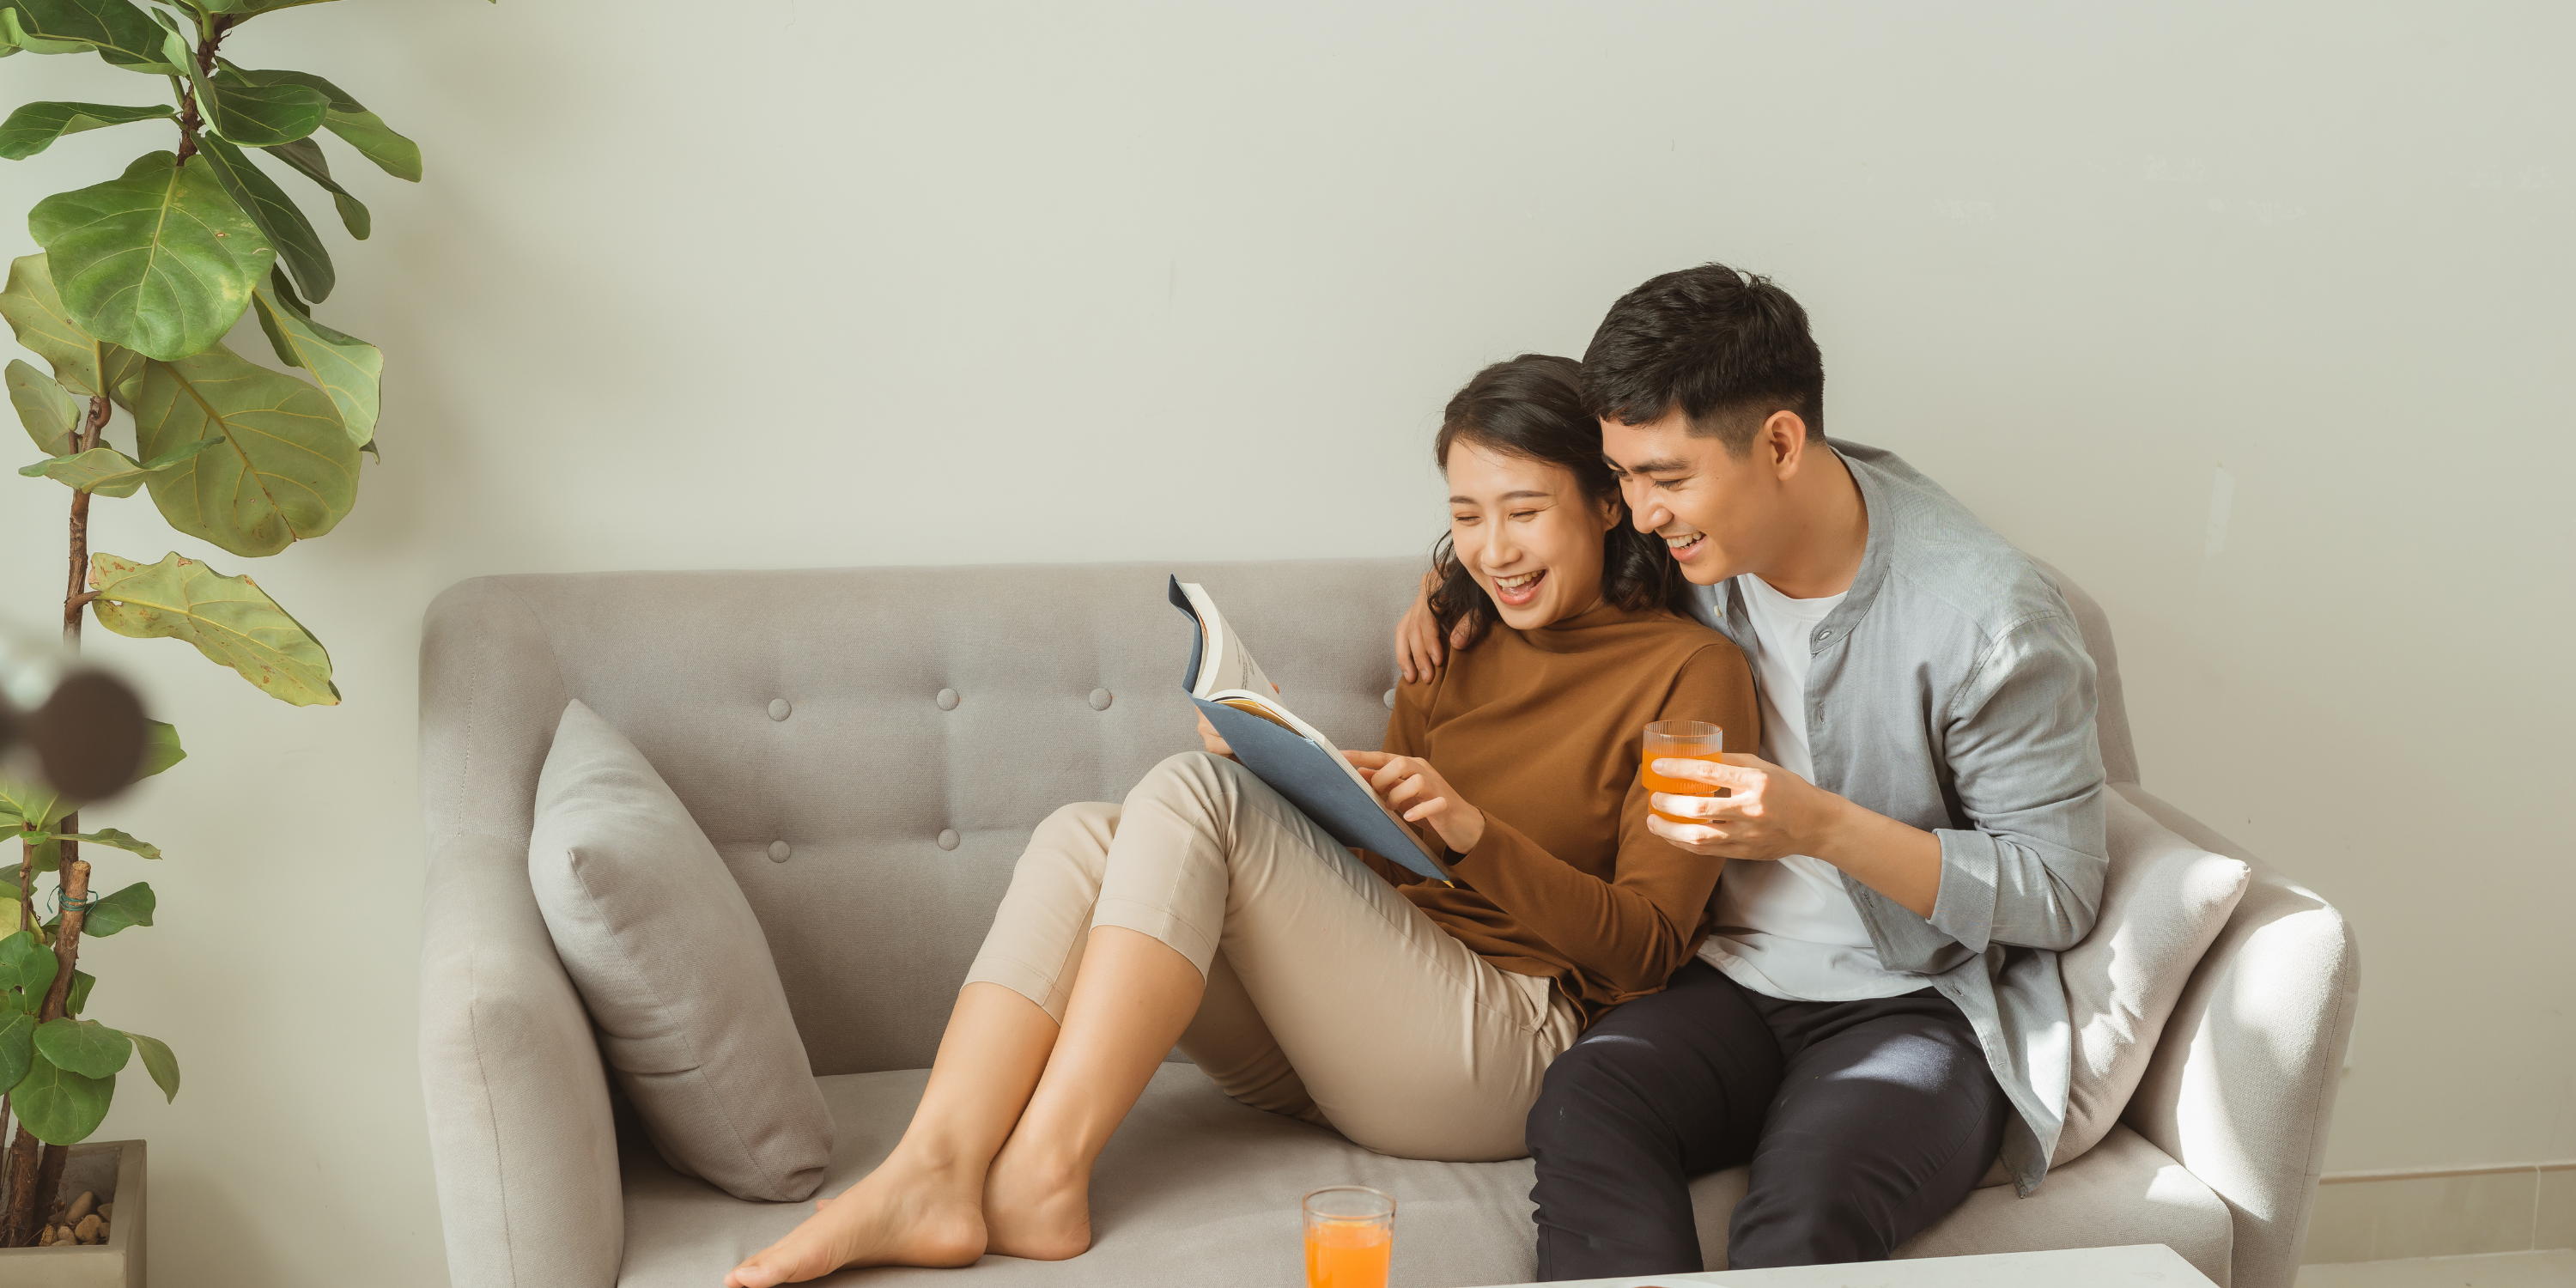 Couple sitting together on couch, both interested in reading a book.